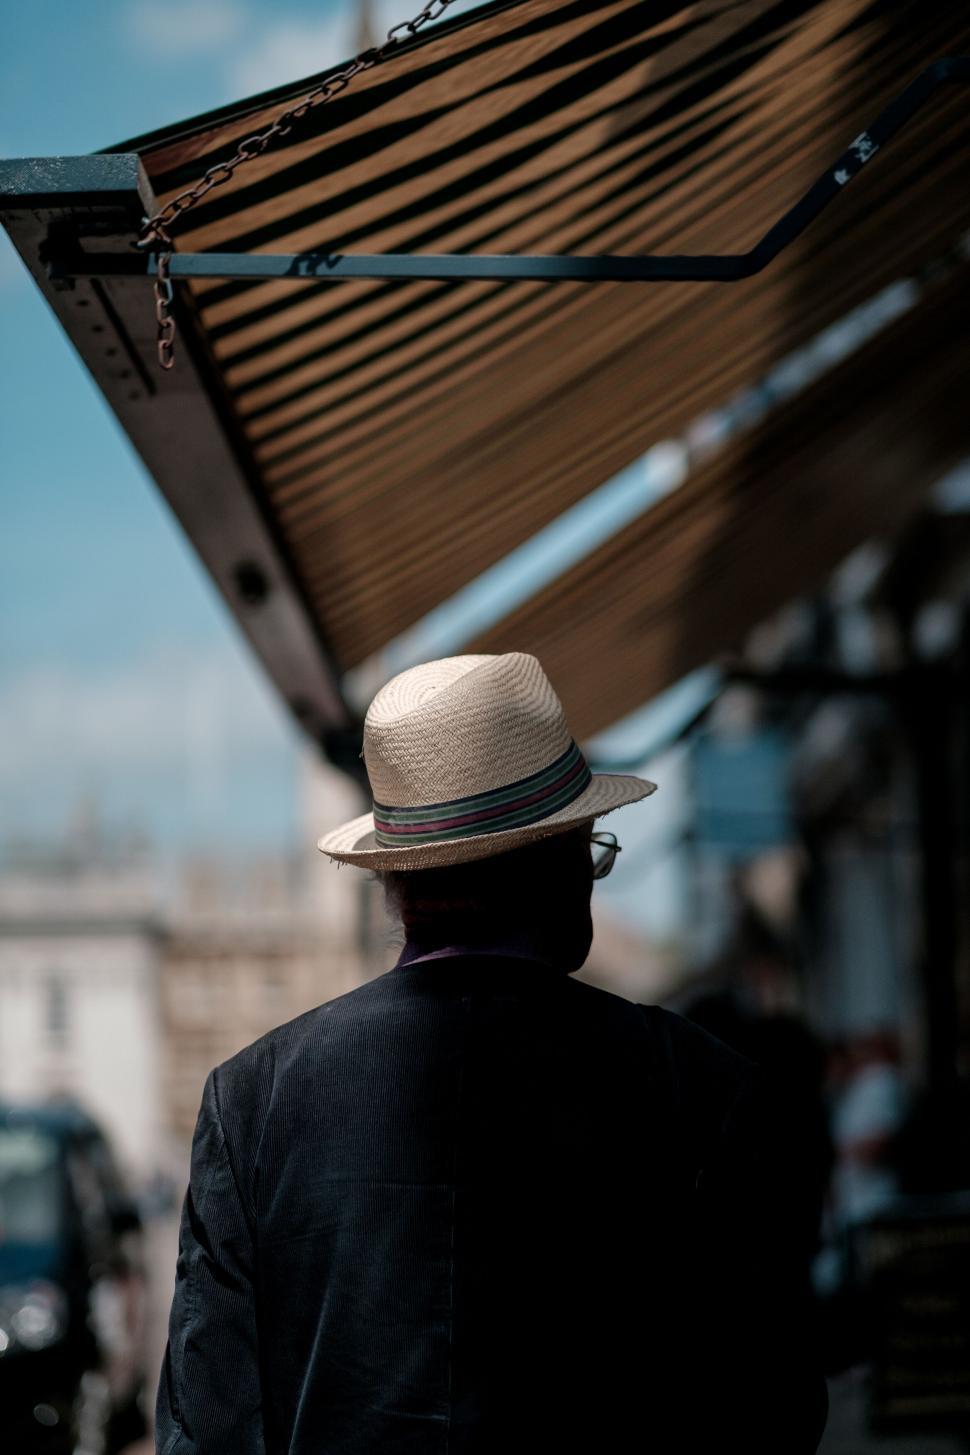 Free Image of Man in hat from behind in urban setting 